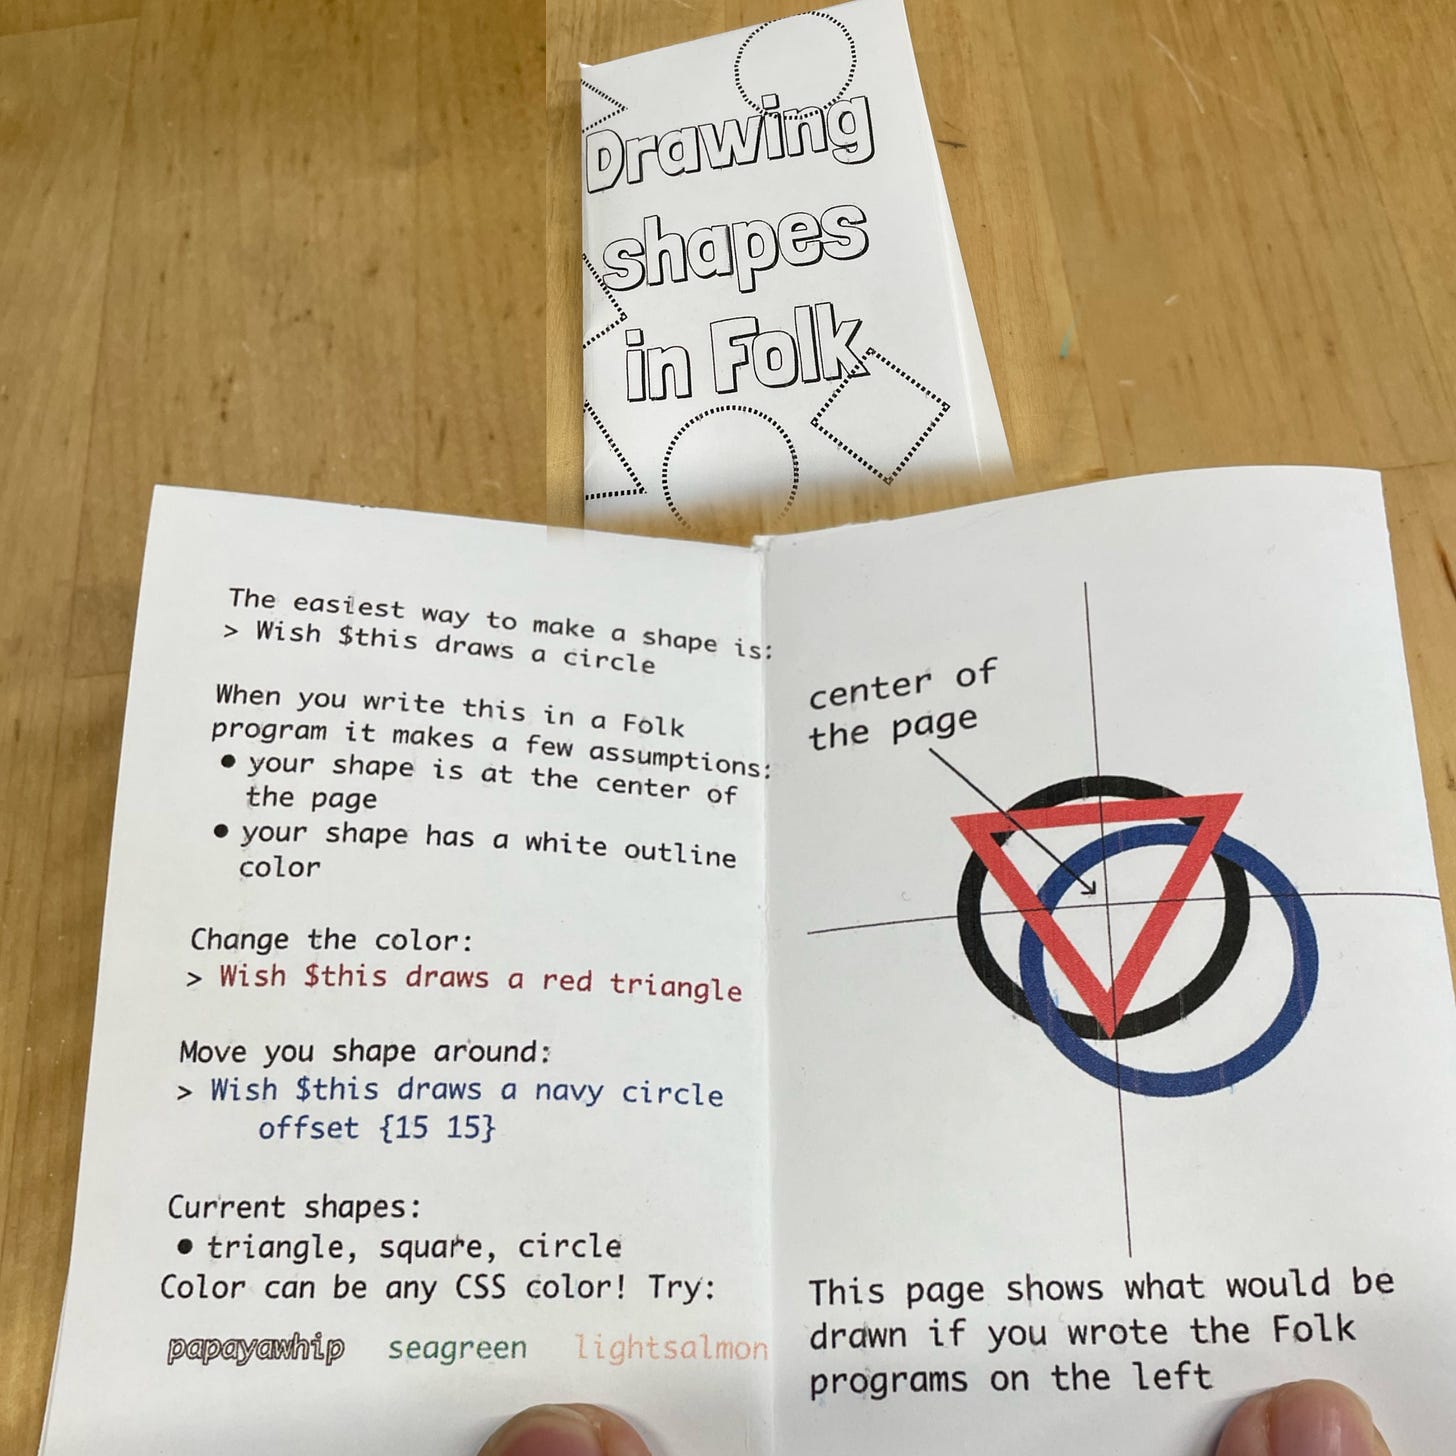 a zine showing how to draw things in Folk